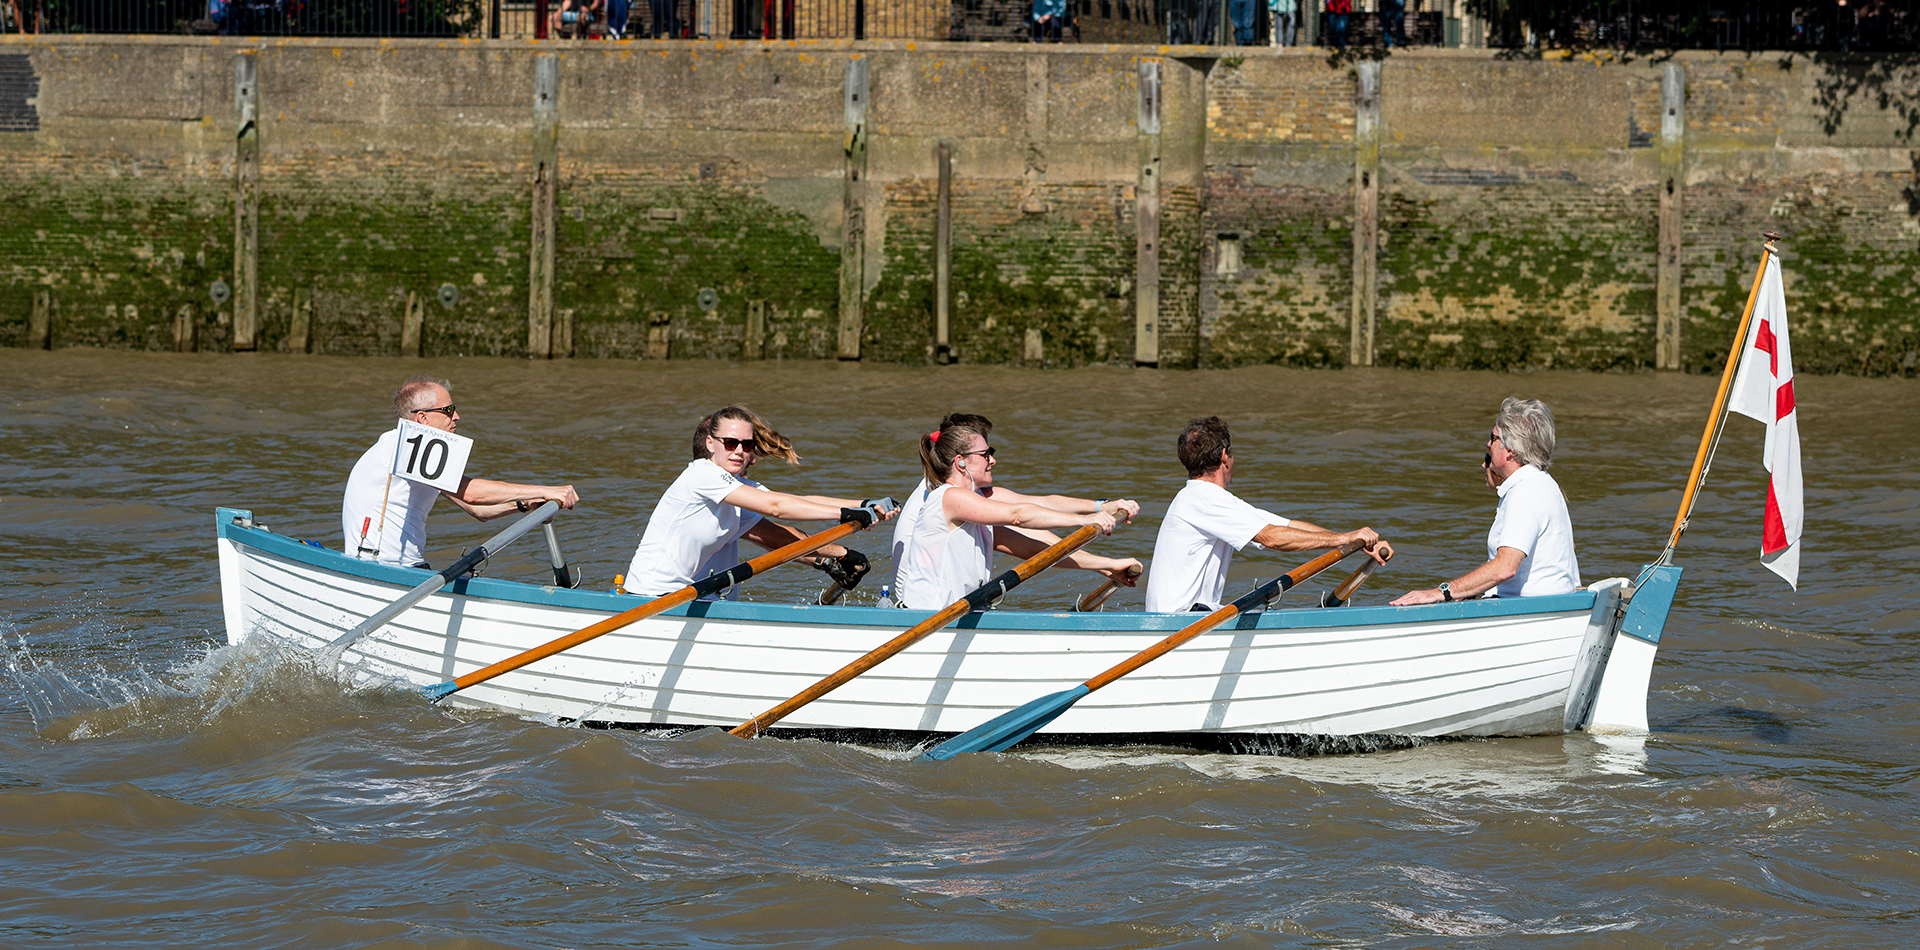 The 2019 Great River Race.